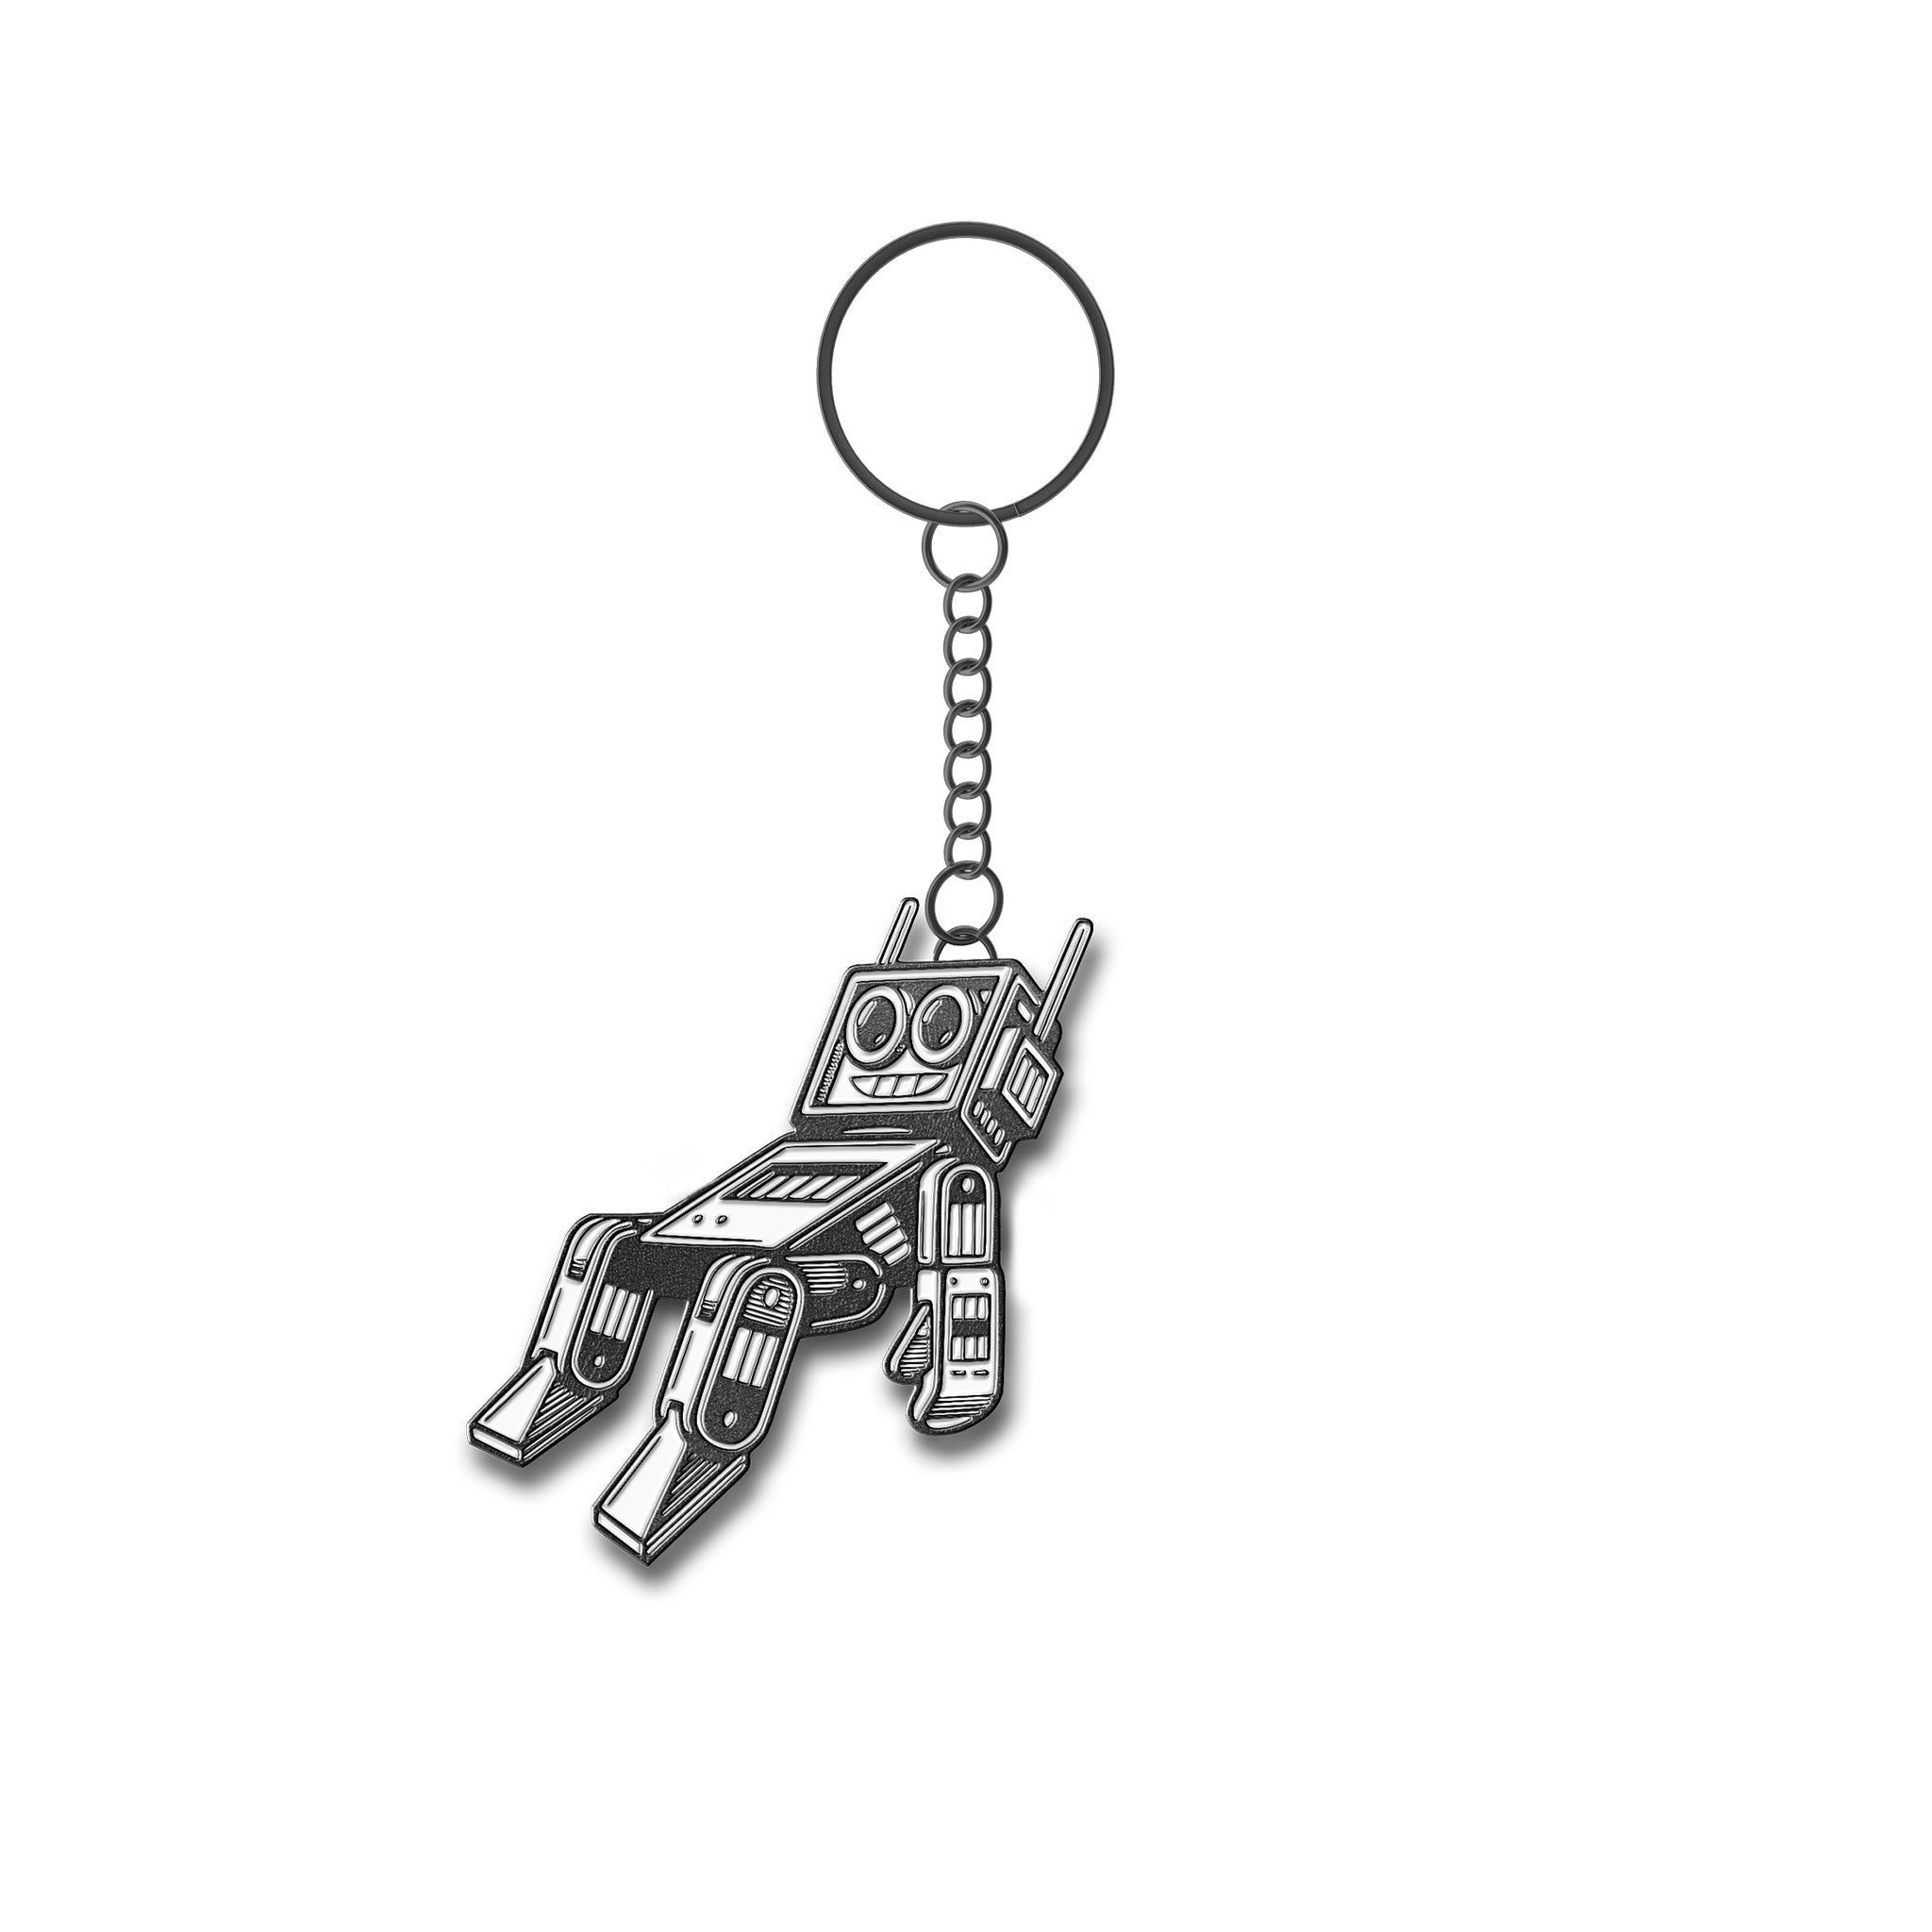 The London Police ROBOT Keychain